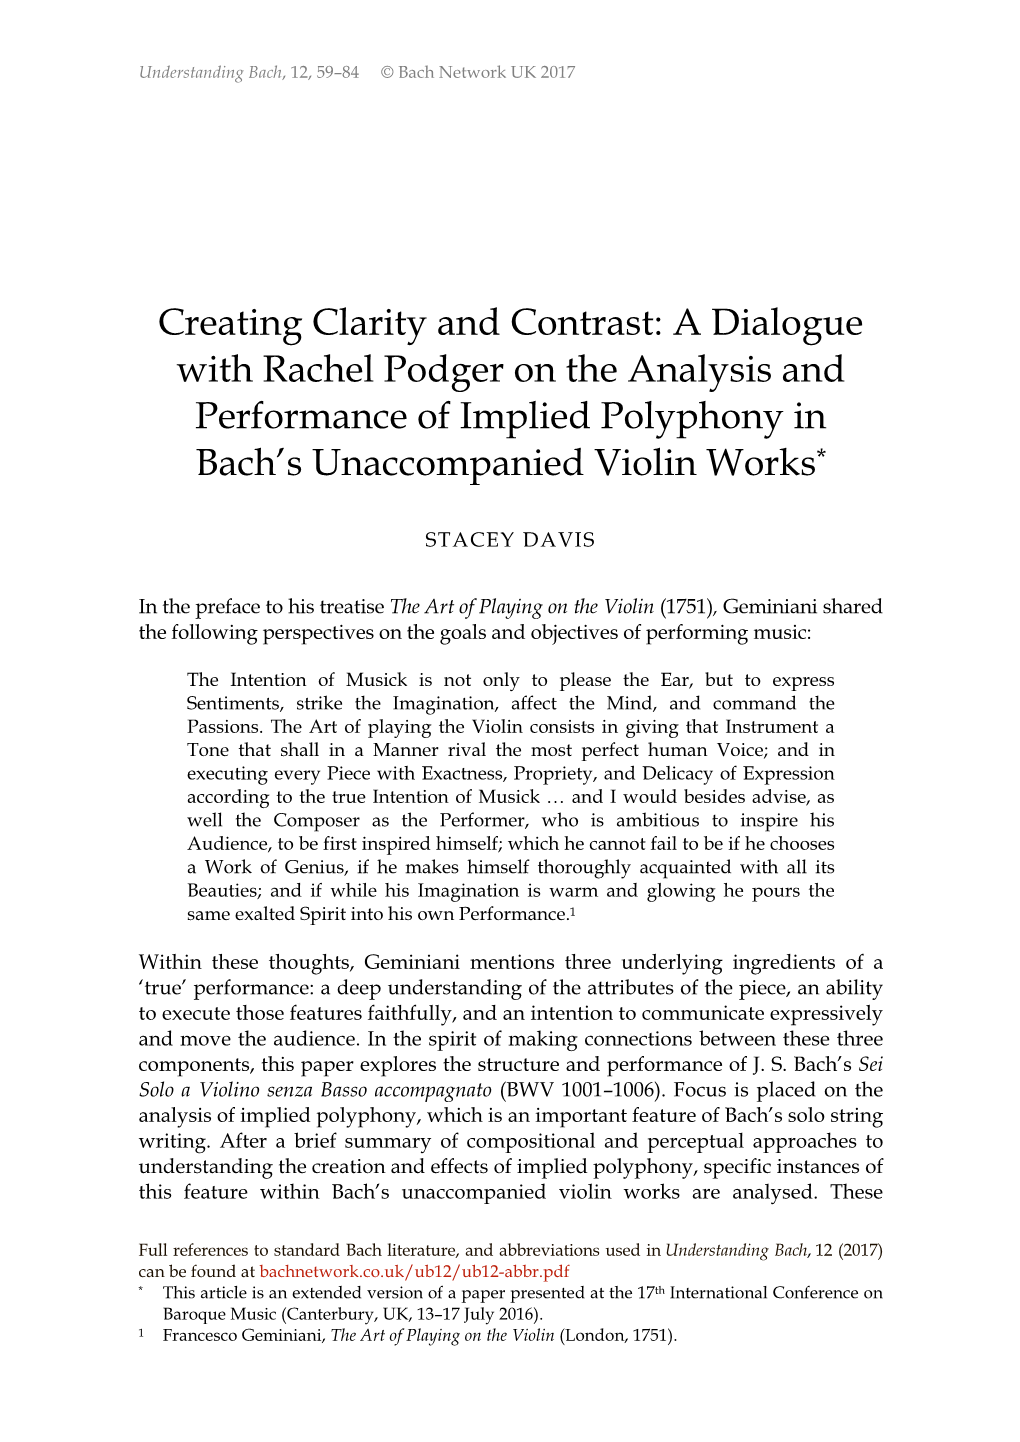 Creating Clarity and Contrast: a Dialogue with Rachel Podger on the Analysis and Performance of Implied Polyphony in Bach's Unaccompanied Violin Works